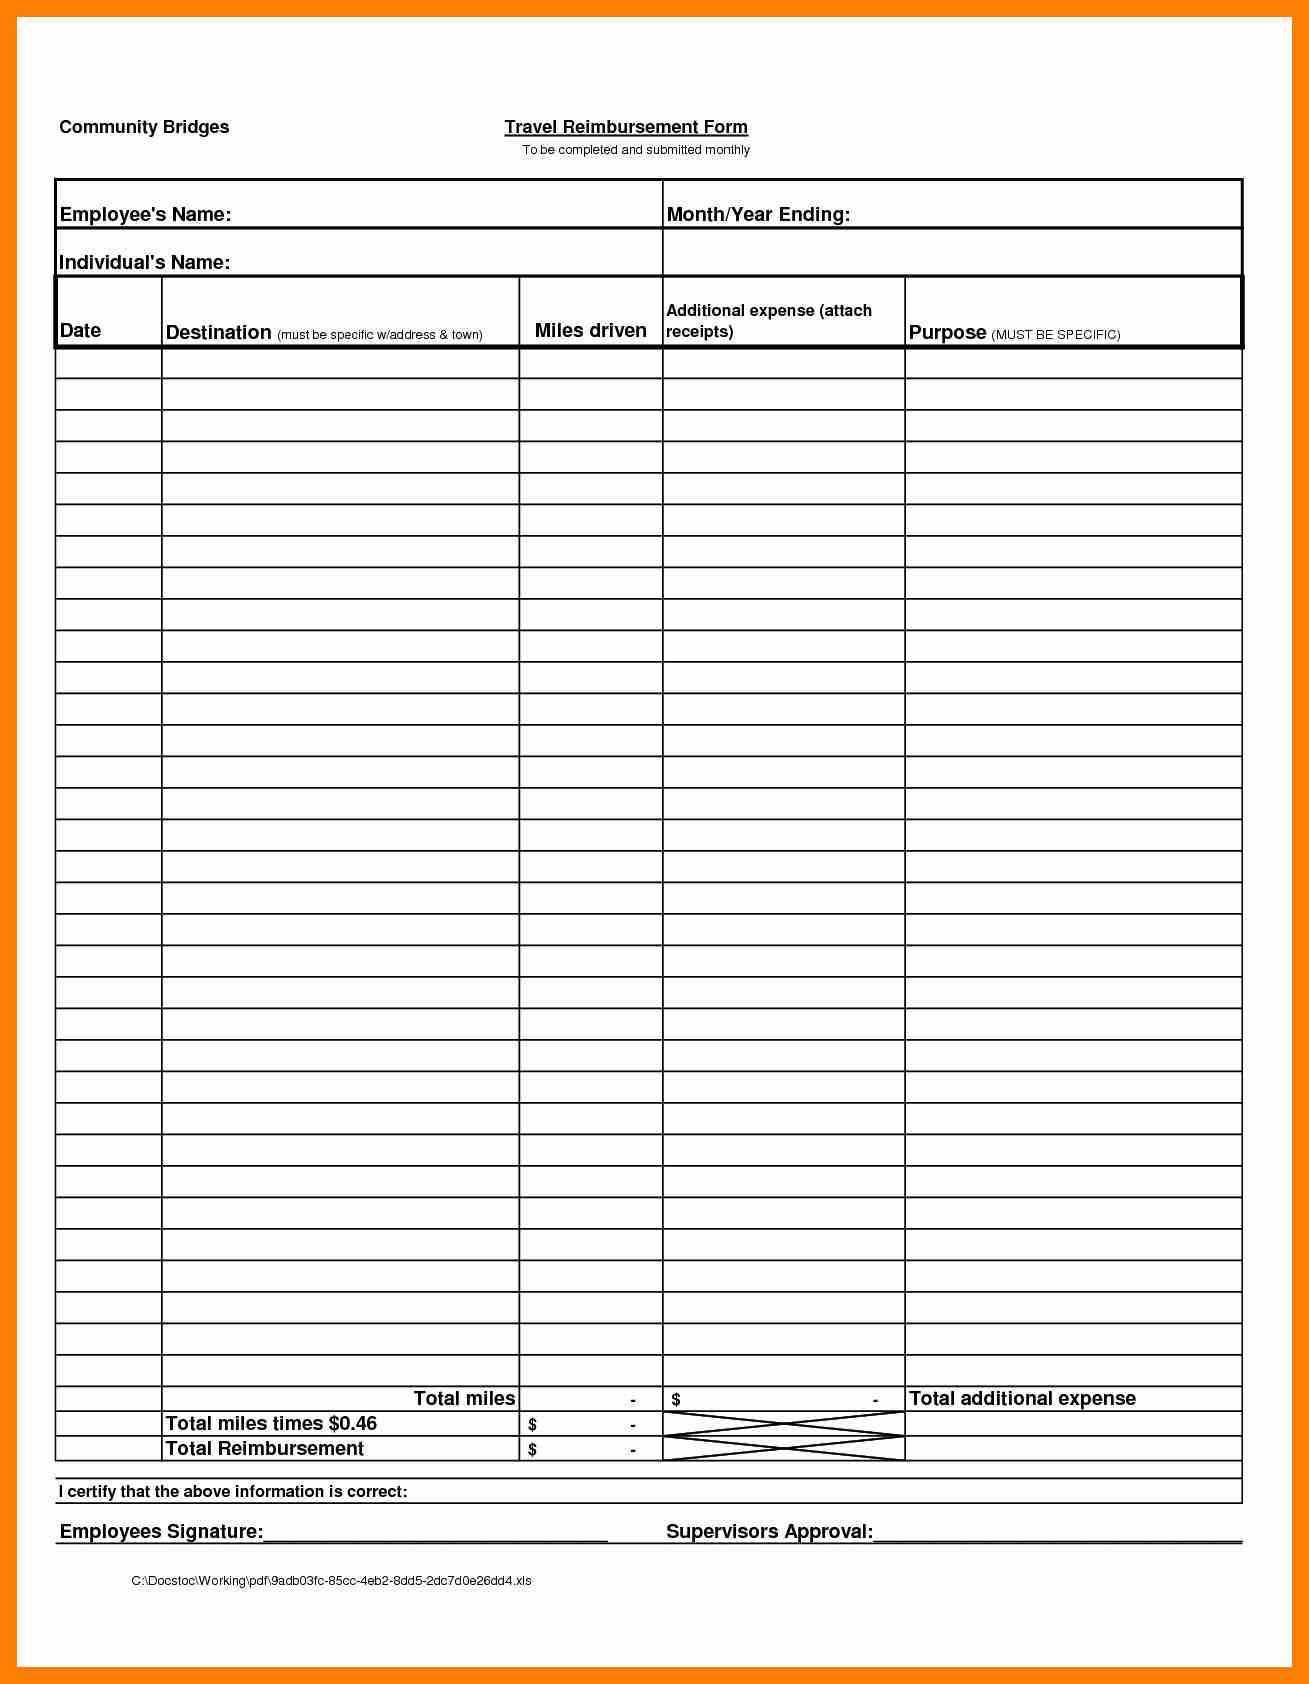 Monthly Budget Worksheet Pdf or Business Monthly Expenses Spreadsheet with In E and Examples Pdf